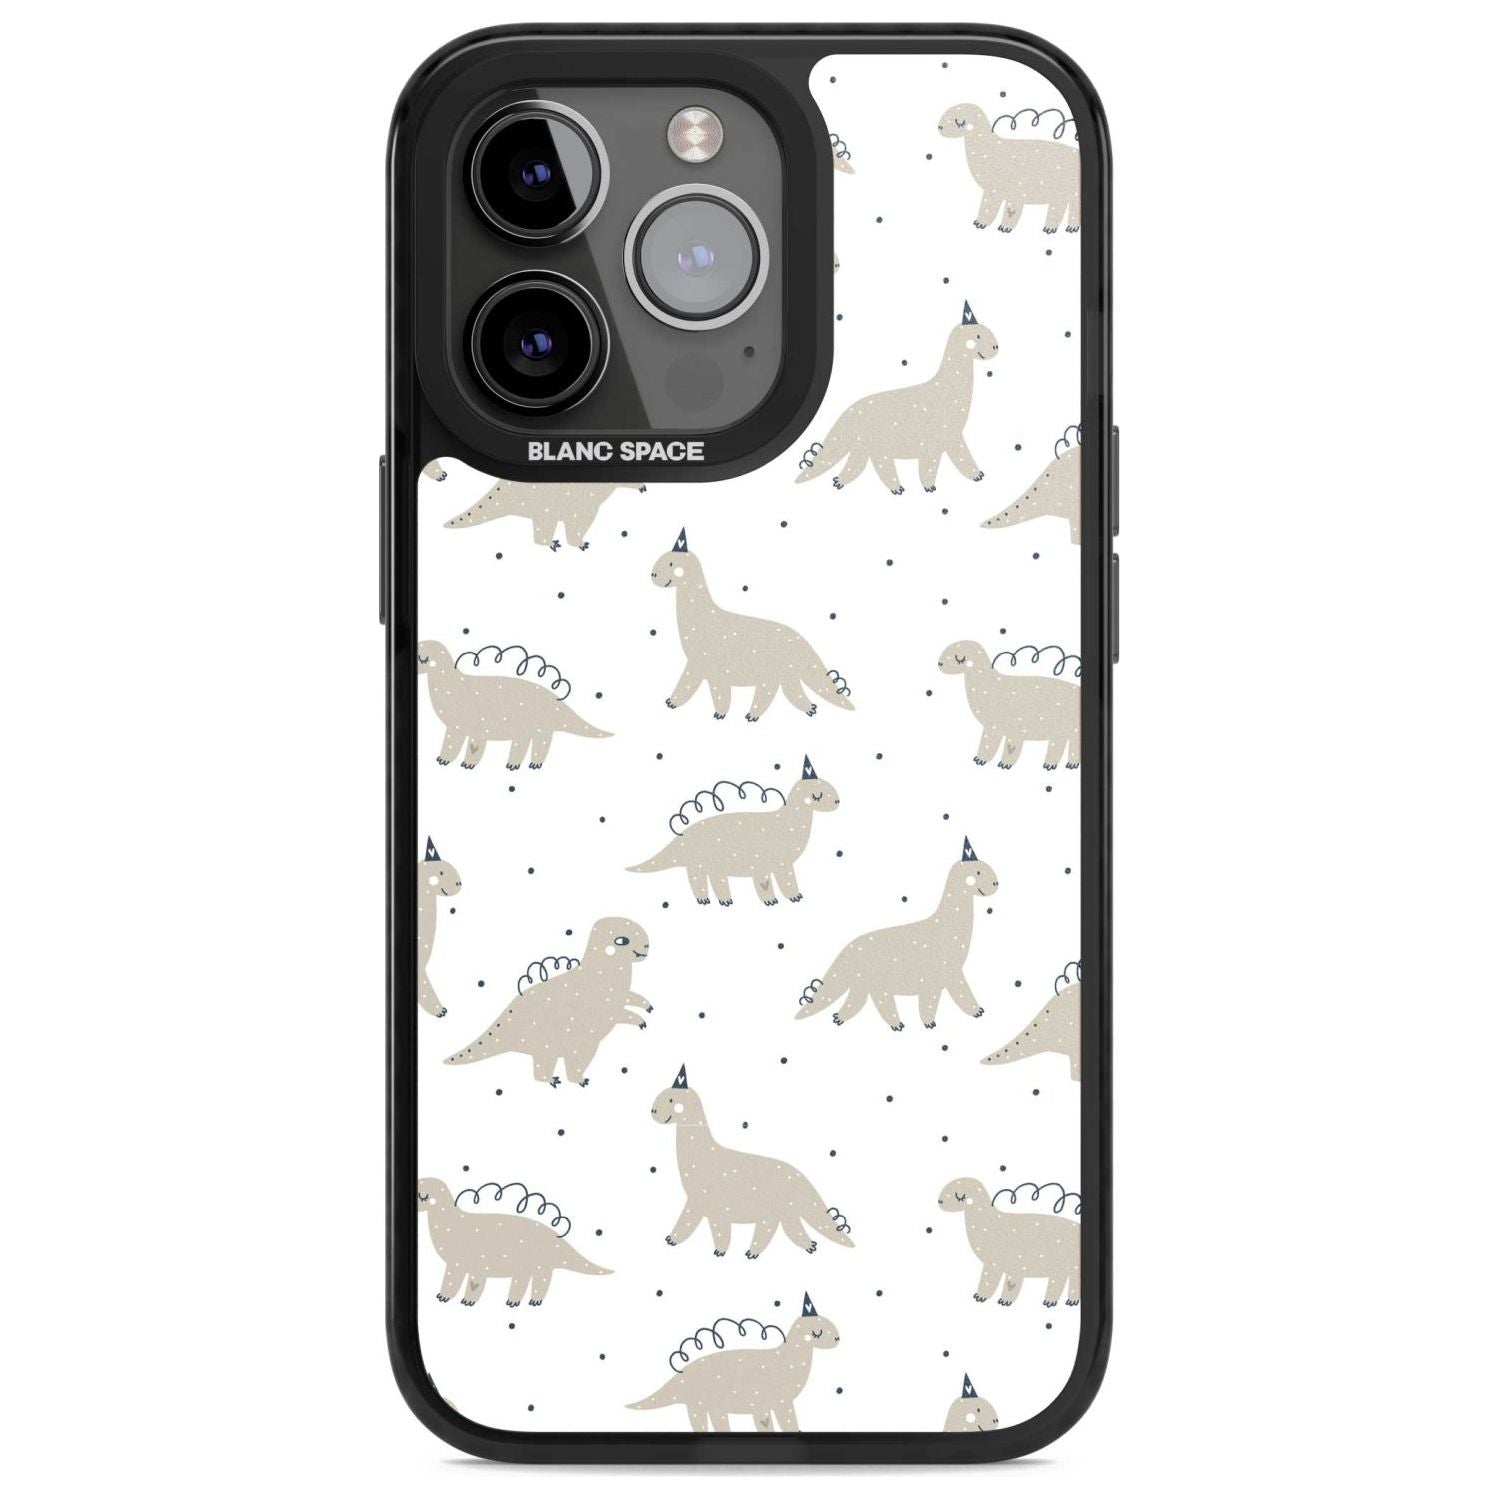 Adorable Dinosaurs Pattern Phone Case iPhone 15 Pro Max / Magsafe Black Impact Case,iPhone 15 Pro / Magsafe Black Impact Case,iPhone 14 Pro Max / Magsafe Black Impact Case,iPhone 14 Pro / Magsafe Black Impact Case,iPhone 13 Pro / Magsafe Black Impact Case Blanc Space